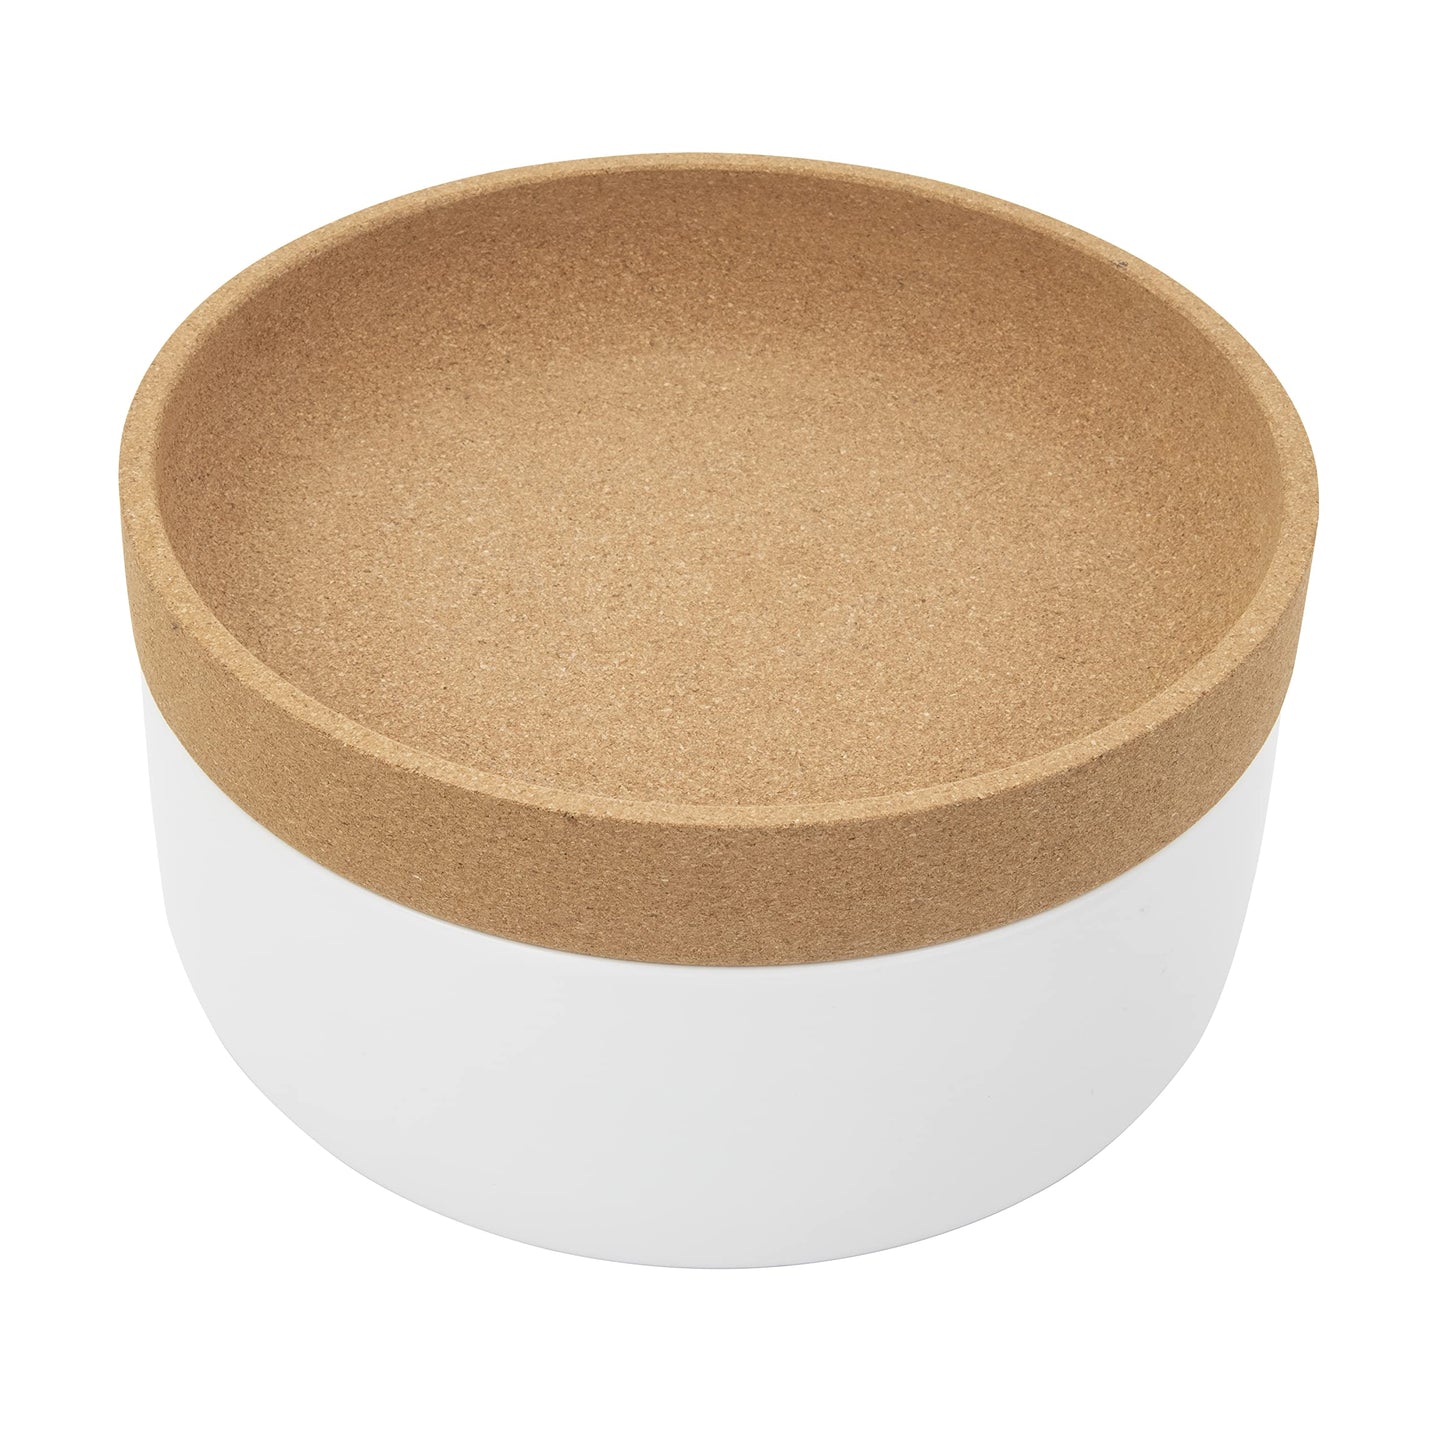 Kamenstein 2 Compartment Large Bowl Extends Produce Freshness, 11 x 11 x 6 Inch, Natural Cork and White Ceramic